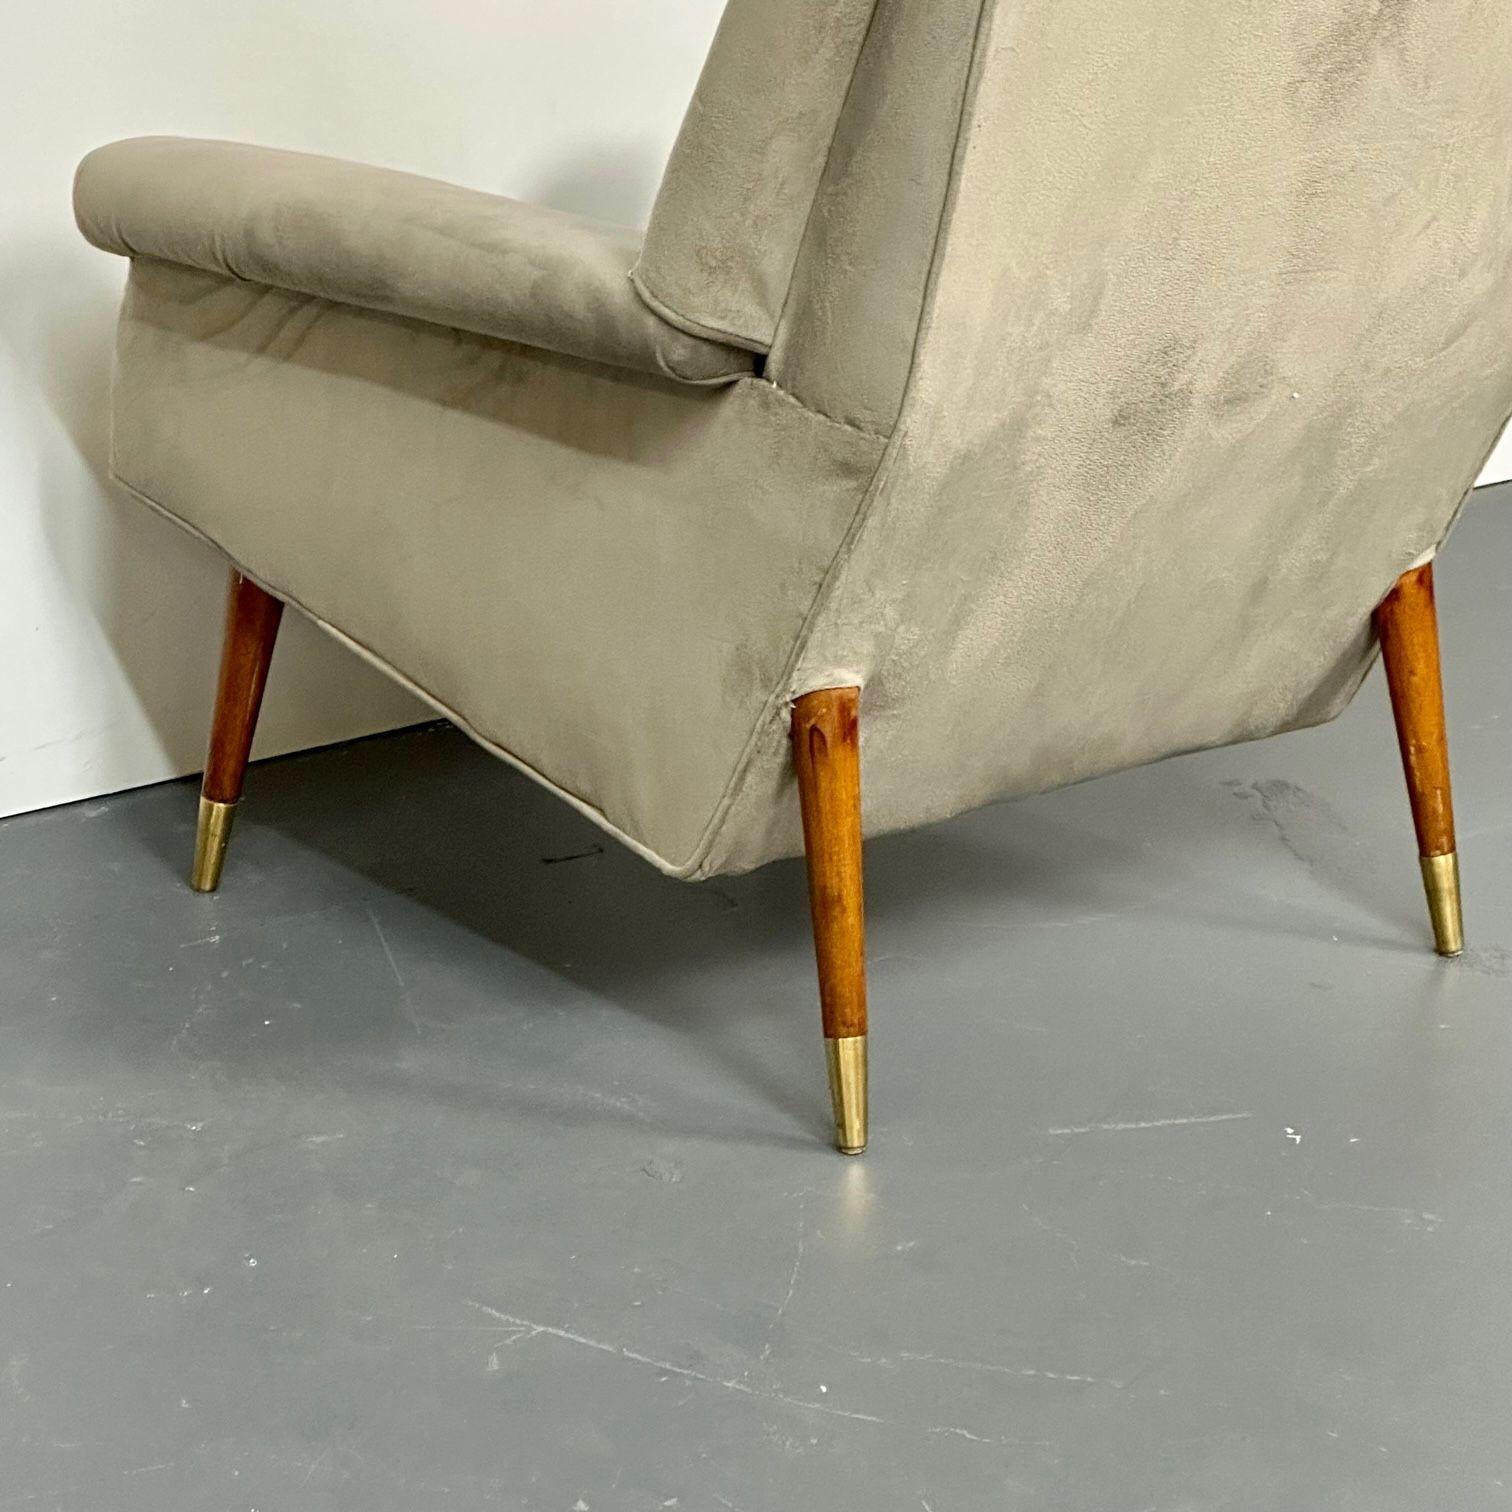 Gio Ponti Style, Mid-Century Modern, Wingback Chairs, Grey Velvet, Wood, 1950s For Sale 6